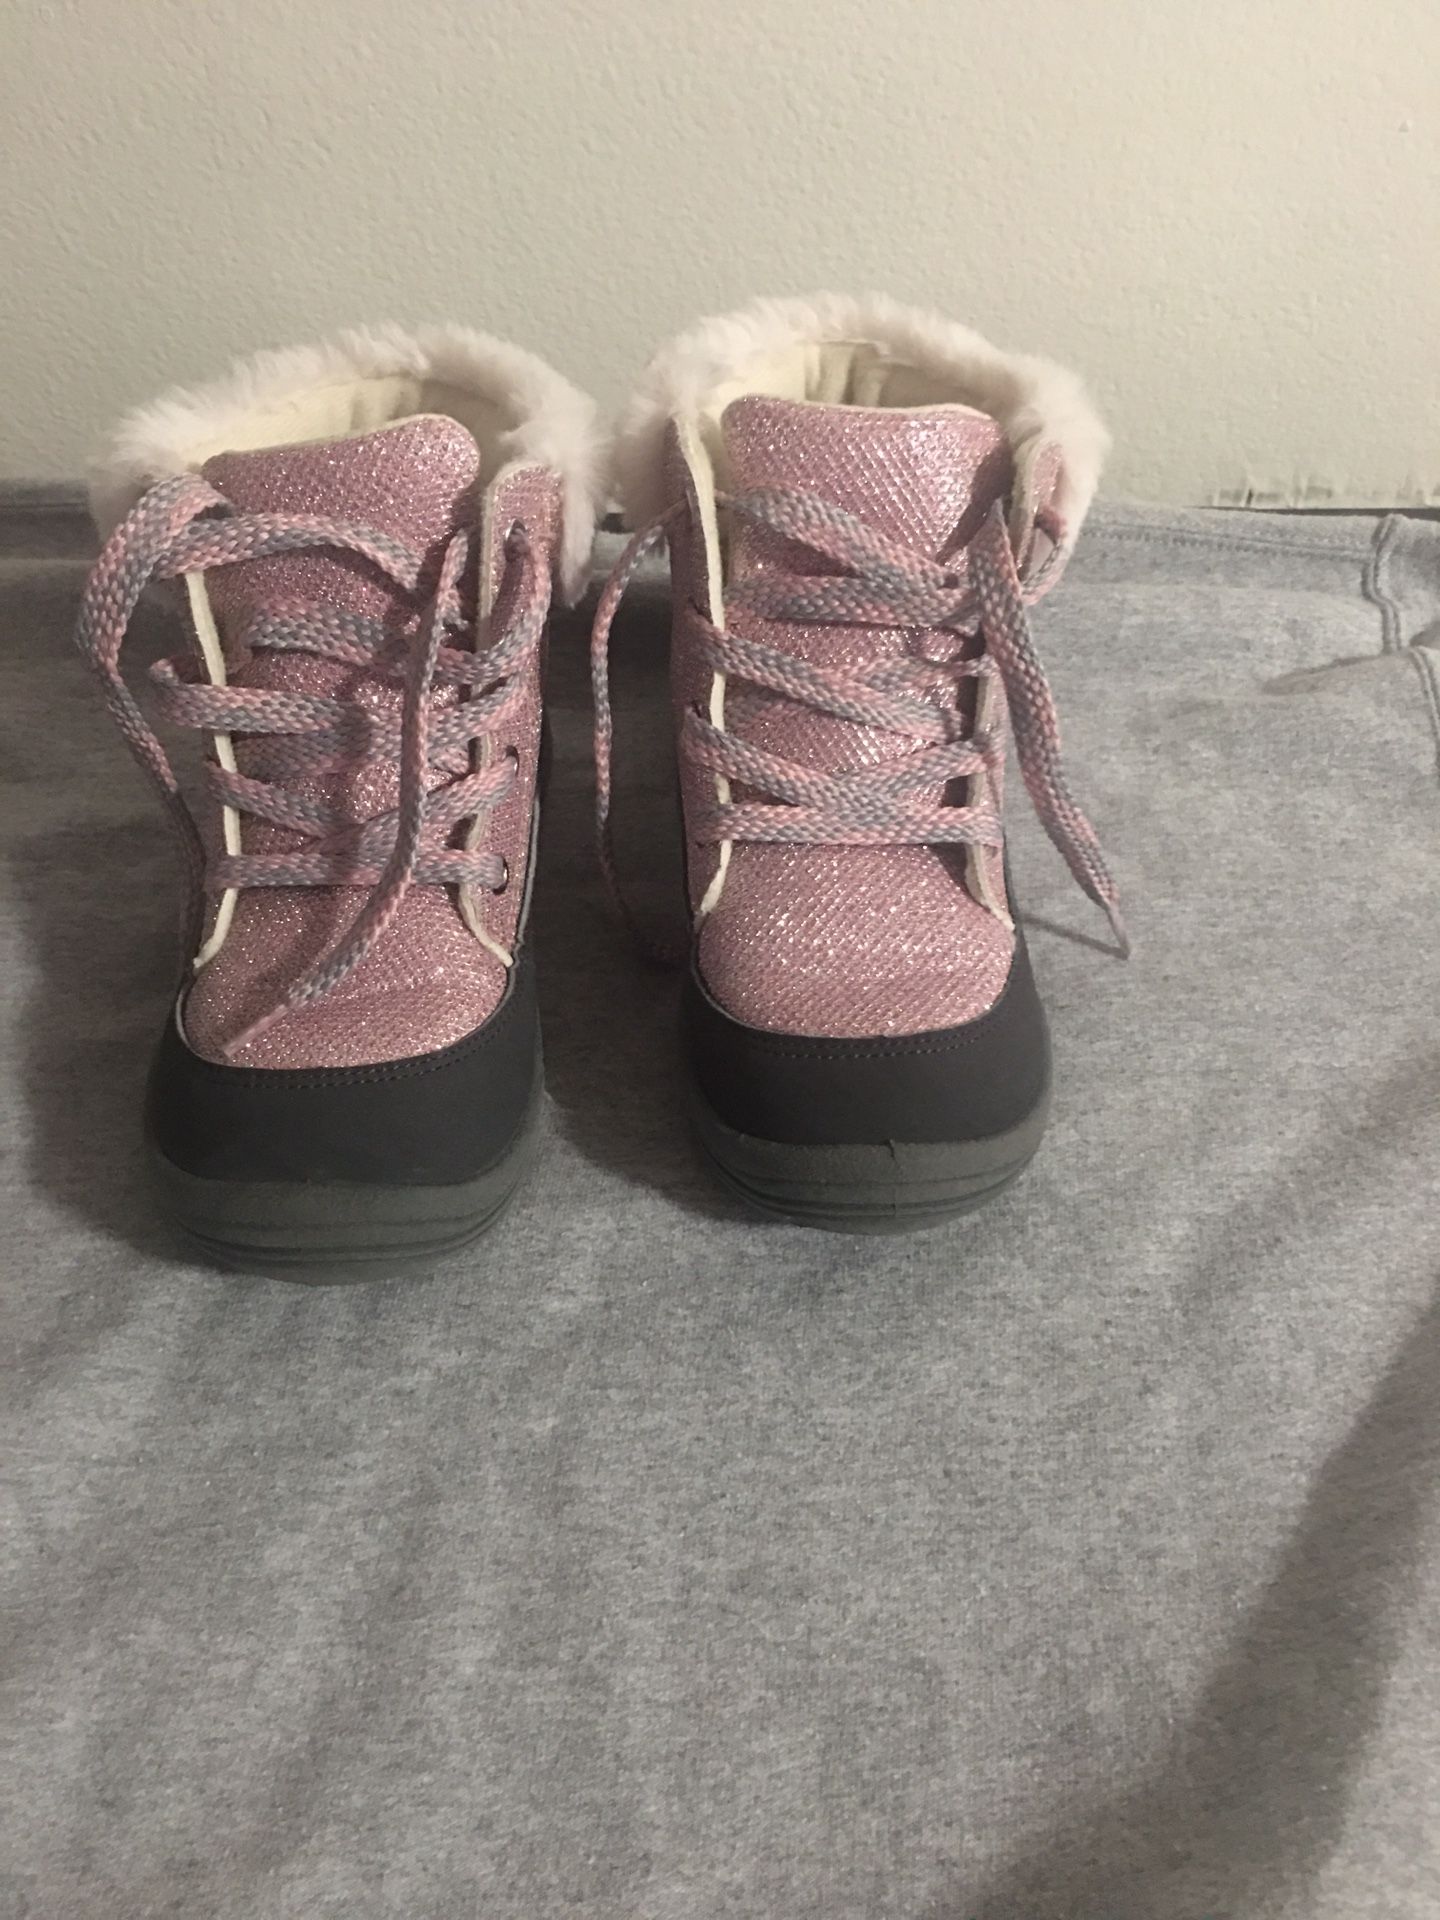 Girls Boots Size 12